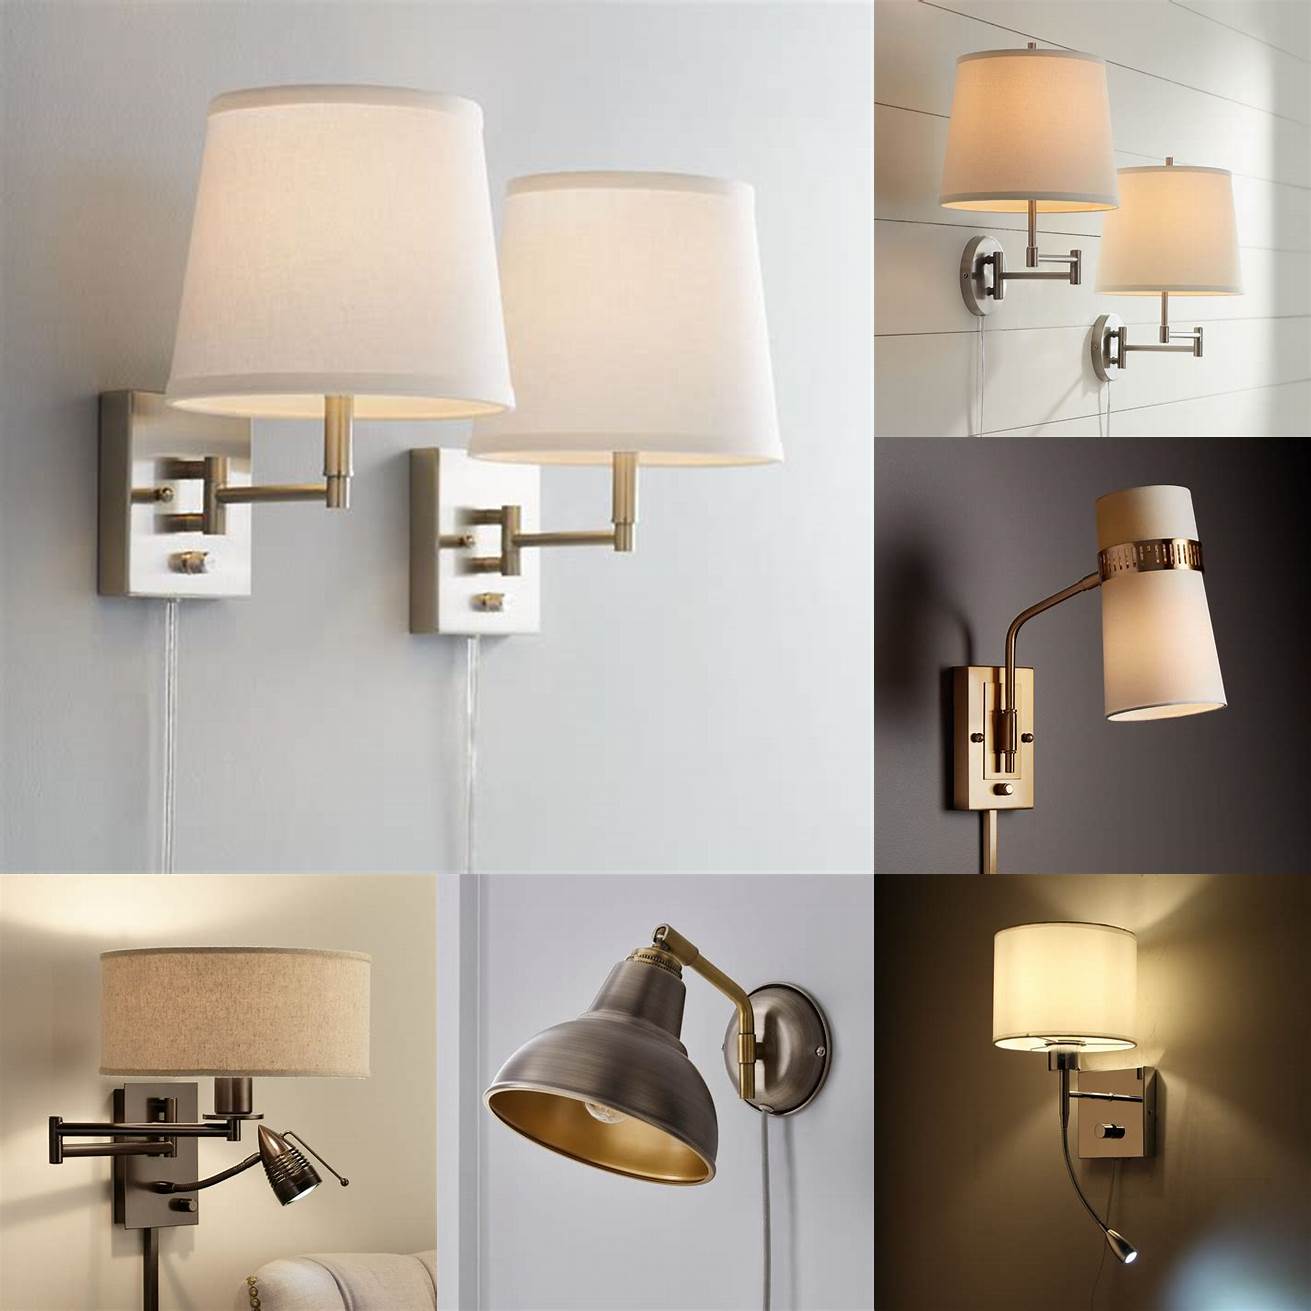 Plug-in wall lights for rental bedrooms